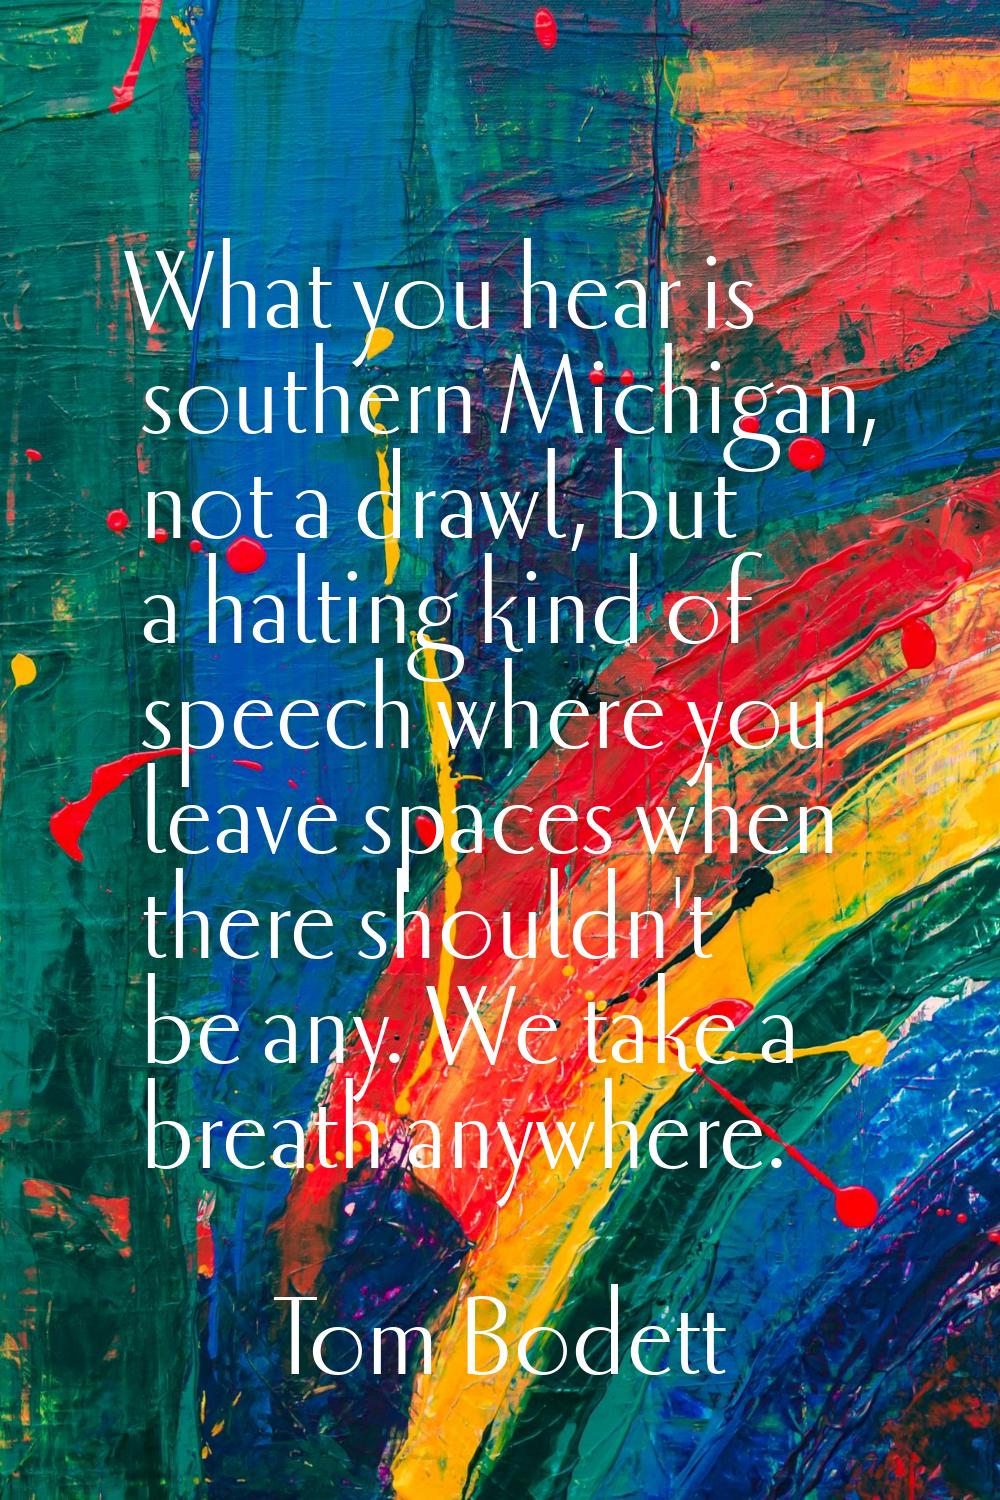 What you hear is southern Michigan, not a drawl, but a halting kind of speech where you leave space